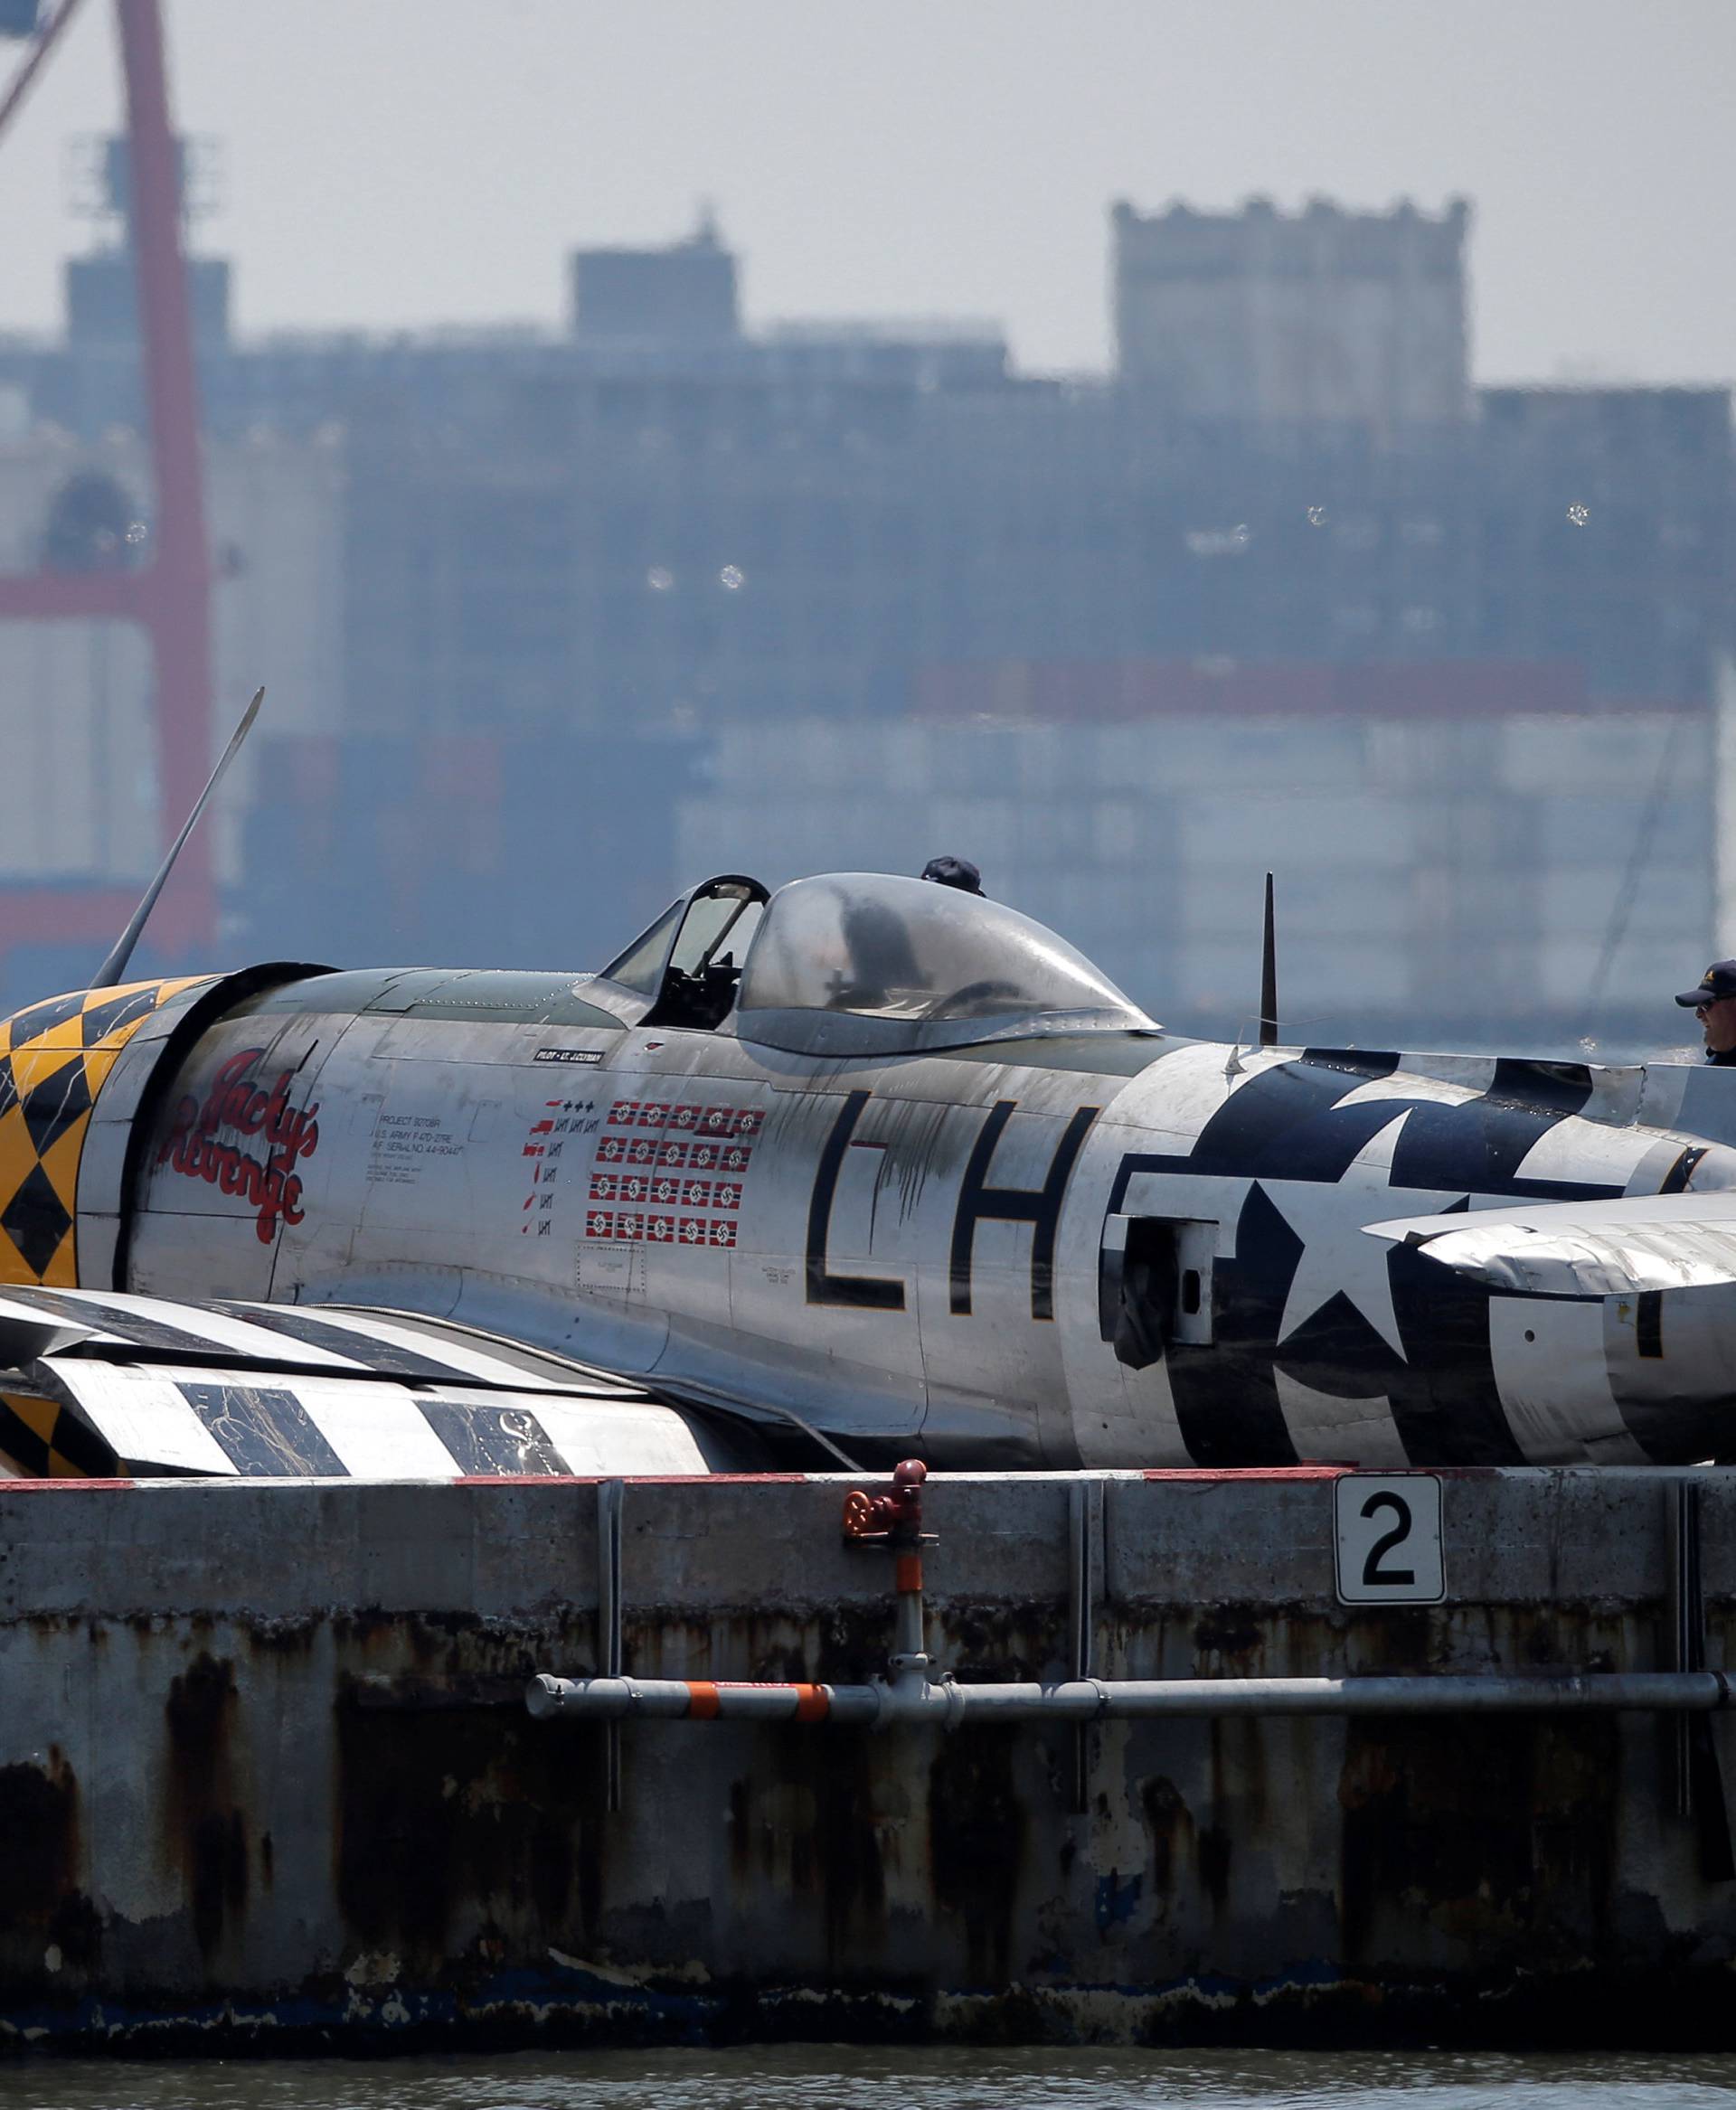 FAA investigators look over the wreckage of a vintage P-47 Thunderbolt airplane that crashed in the Hudson River in New York 